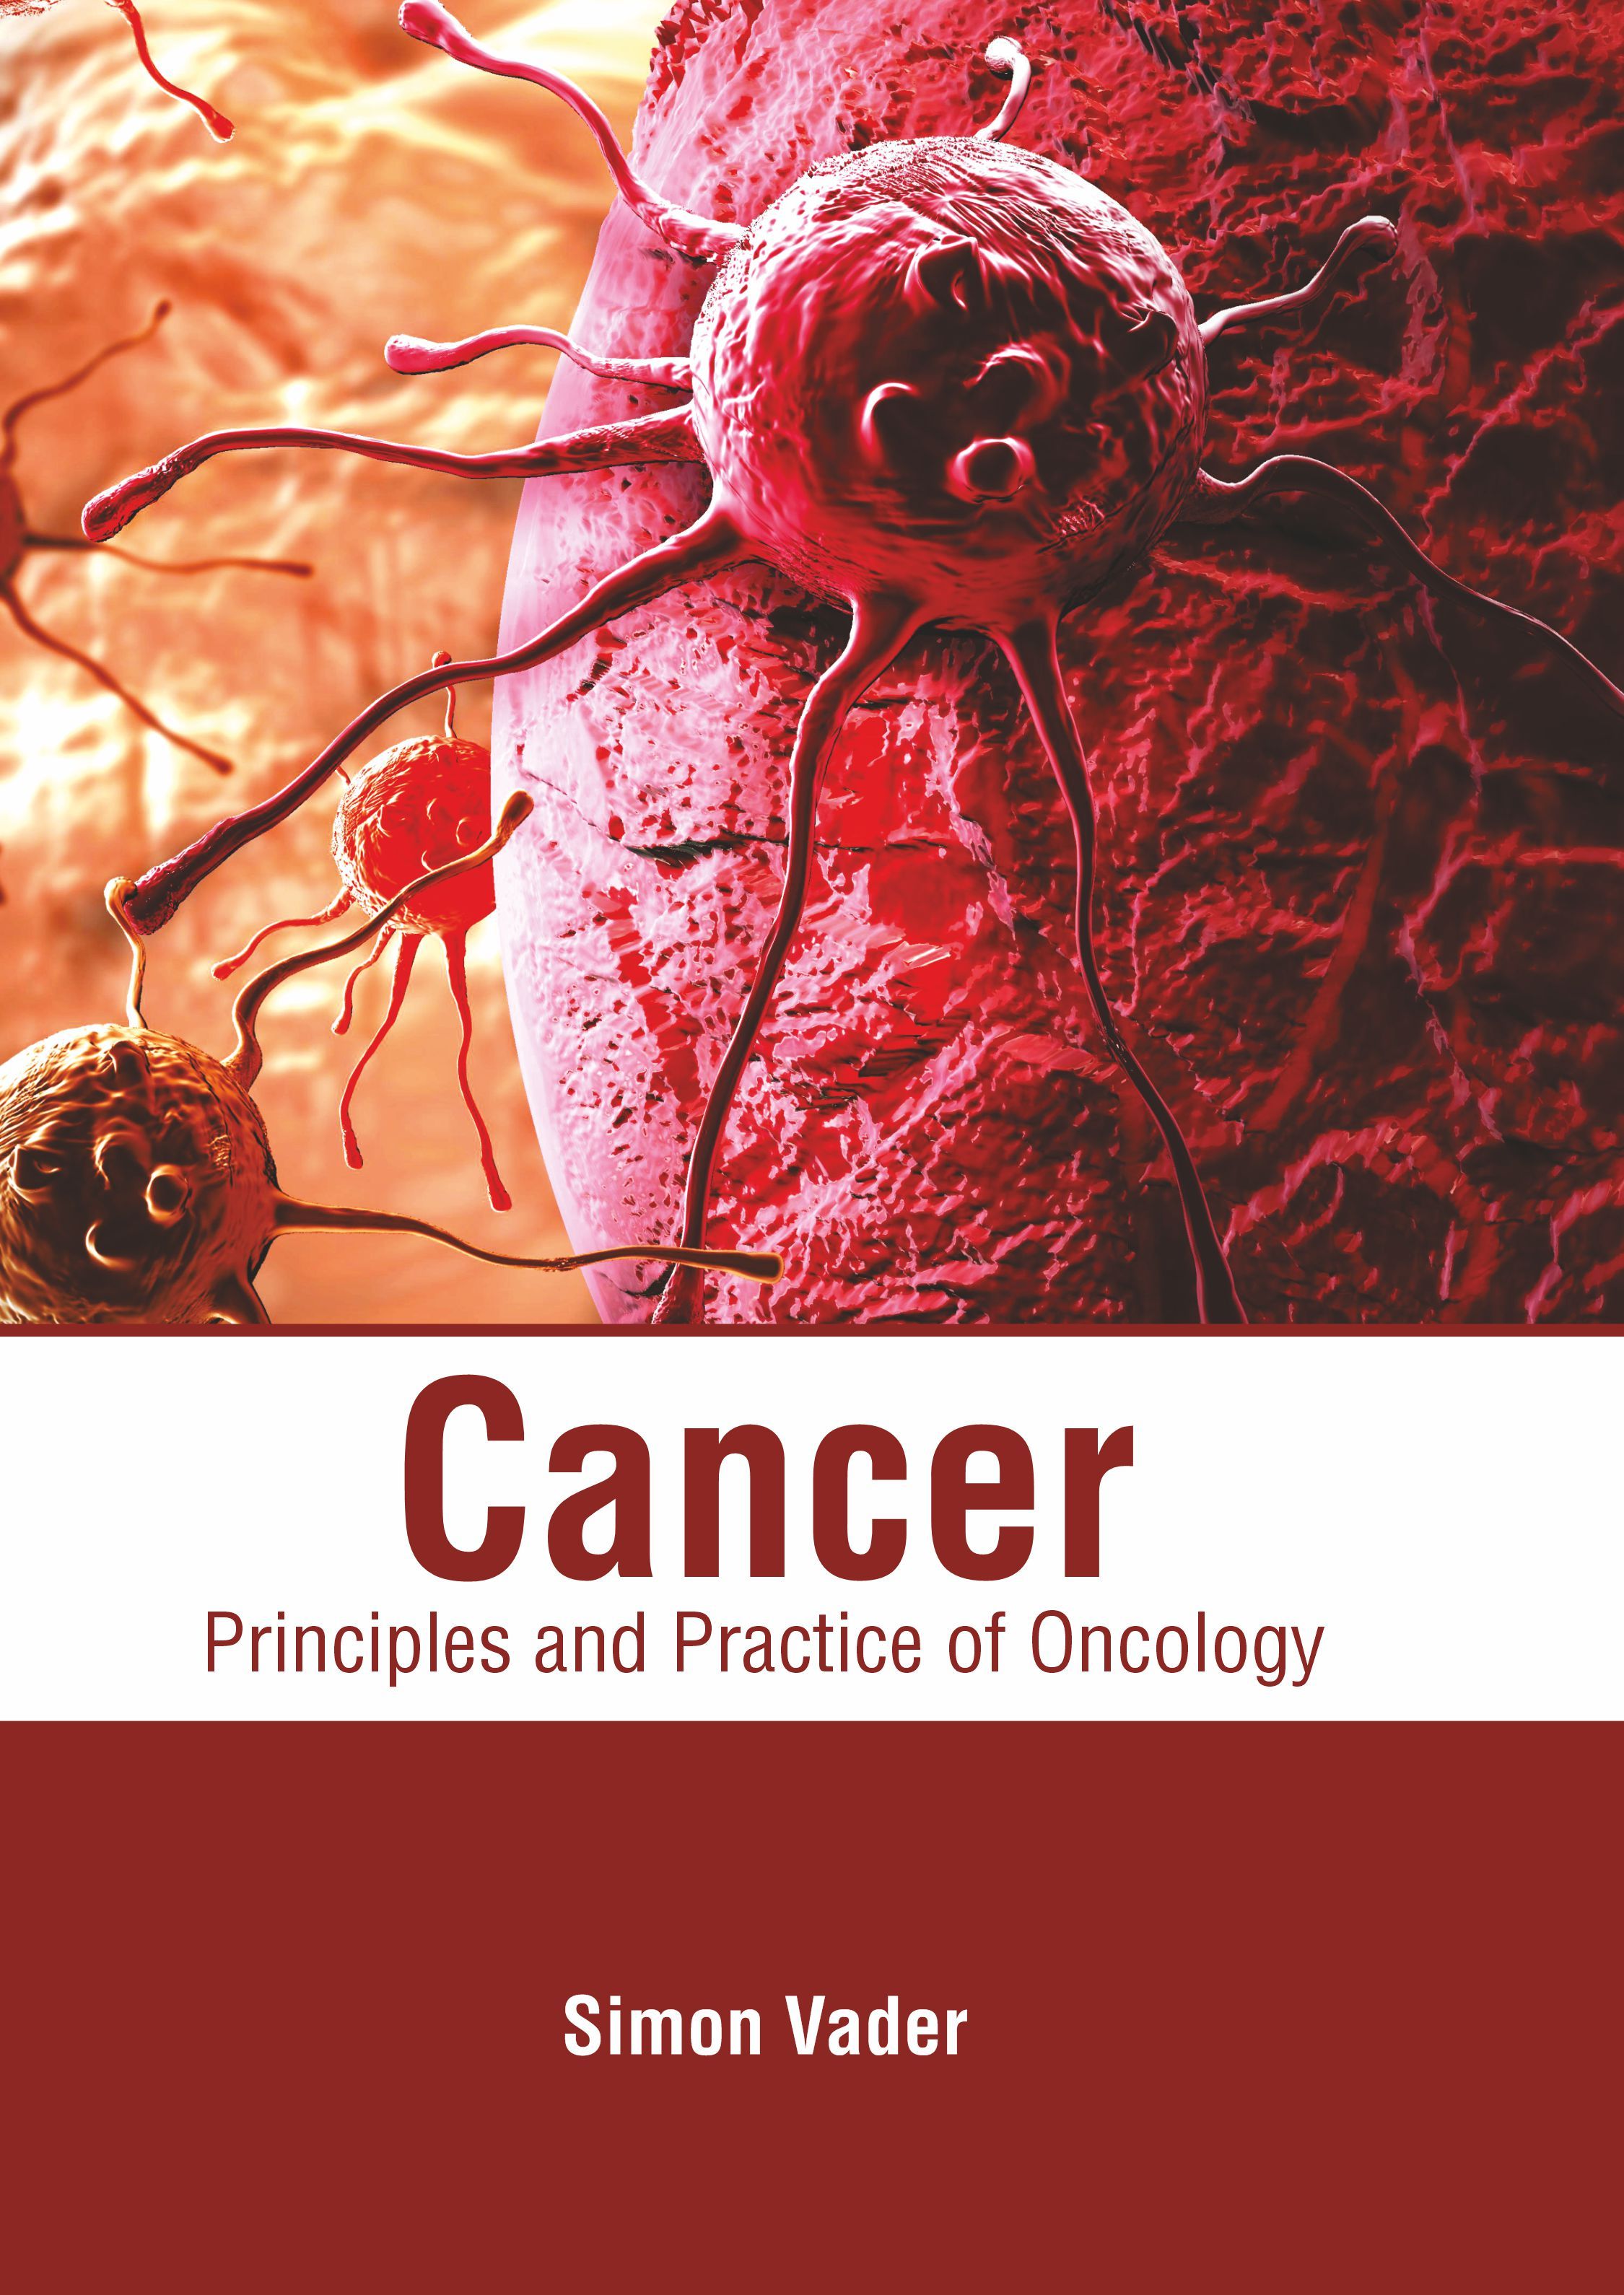 CANCER: PRINCIPLES AND PRACTICE OF ONCOLOGY